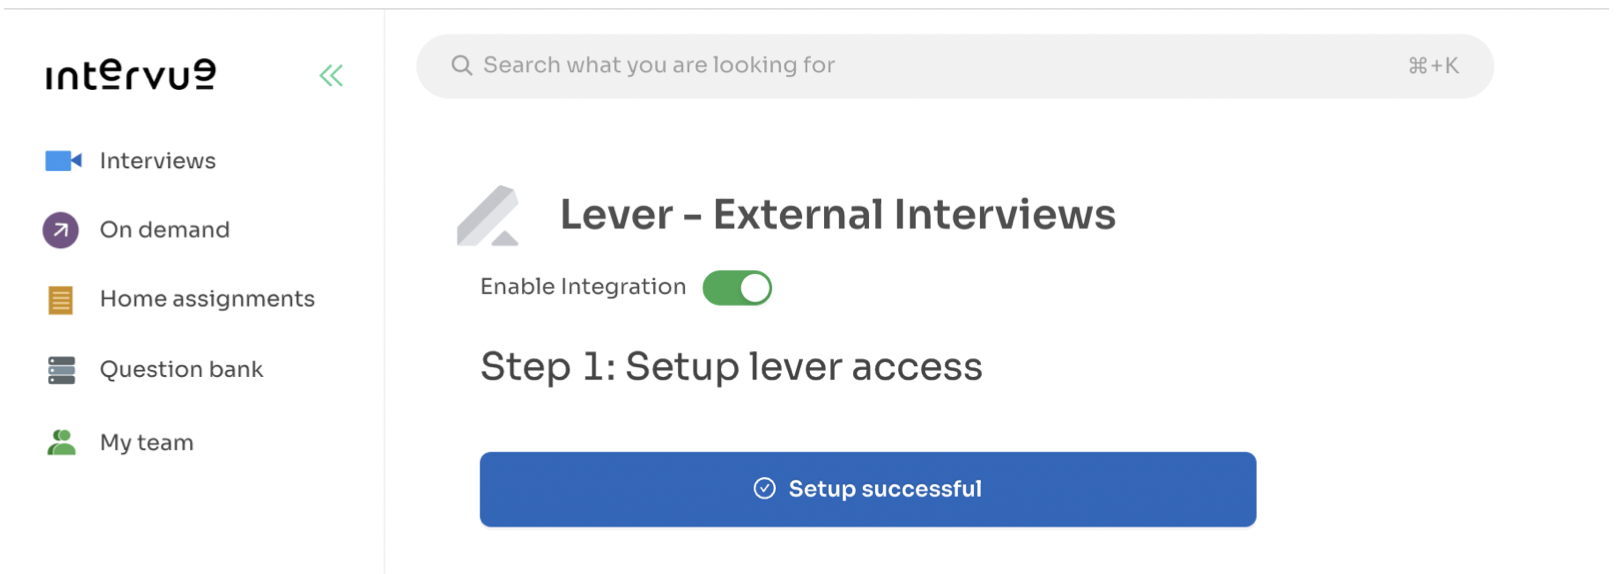 Intervue platform with lever external interviews and green on toggle next to enable integration